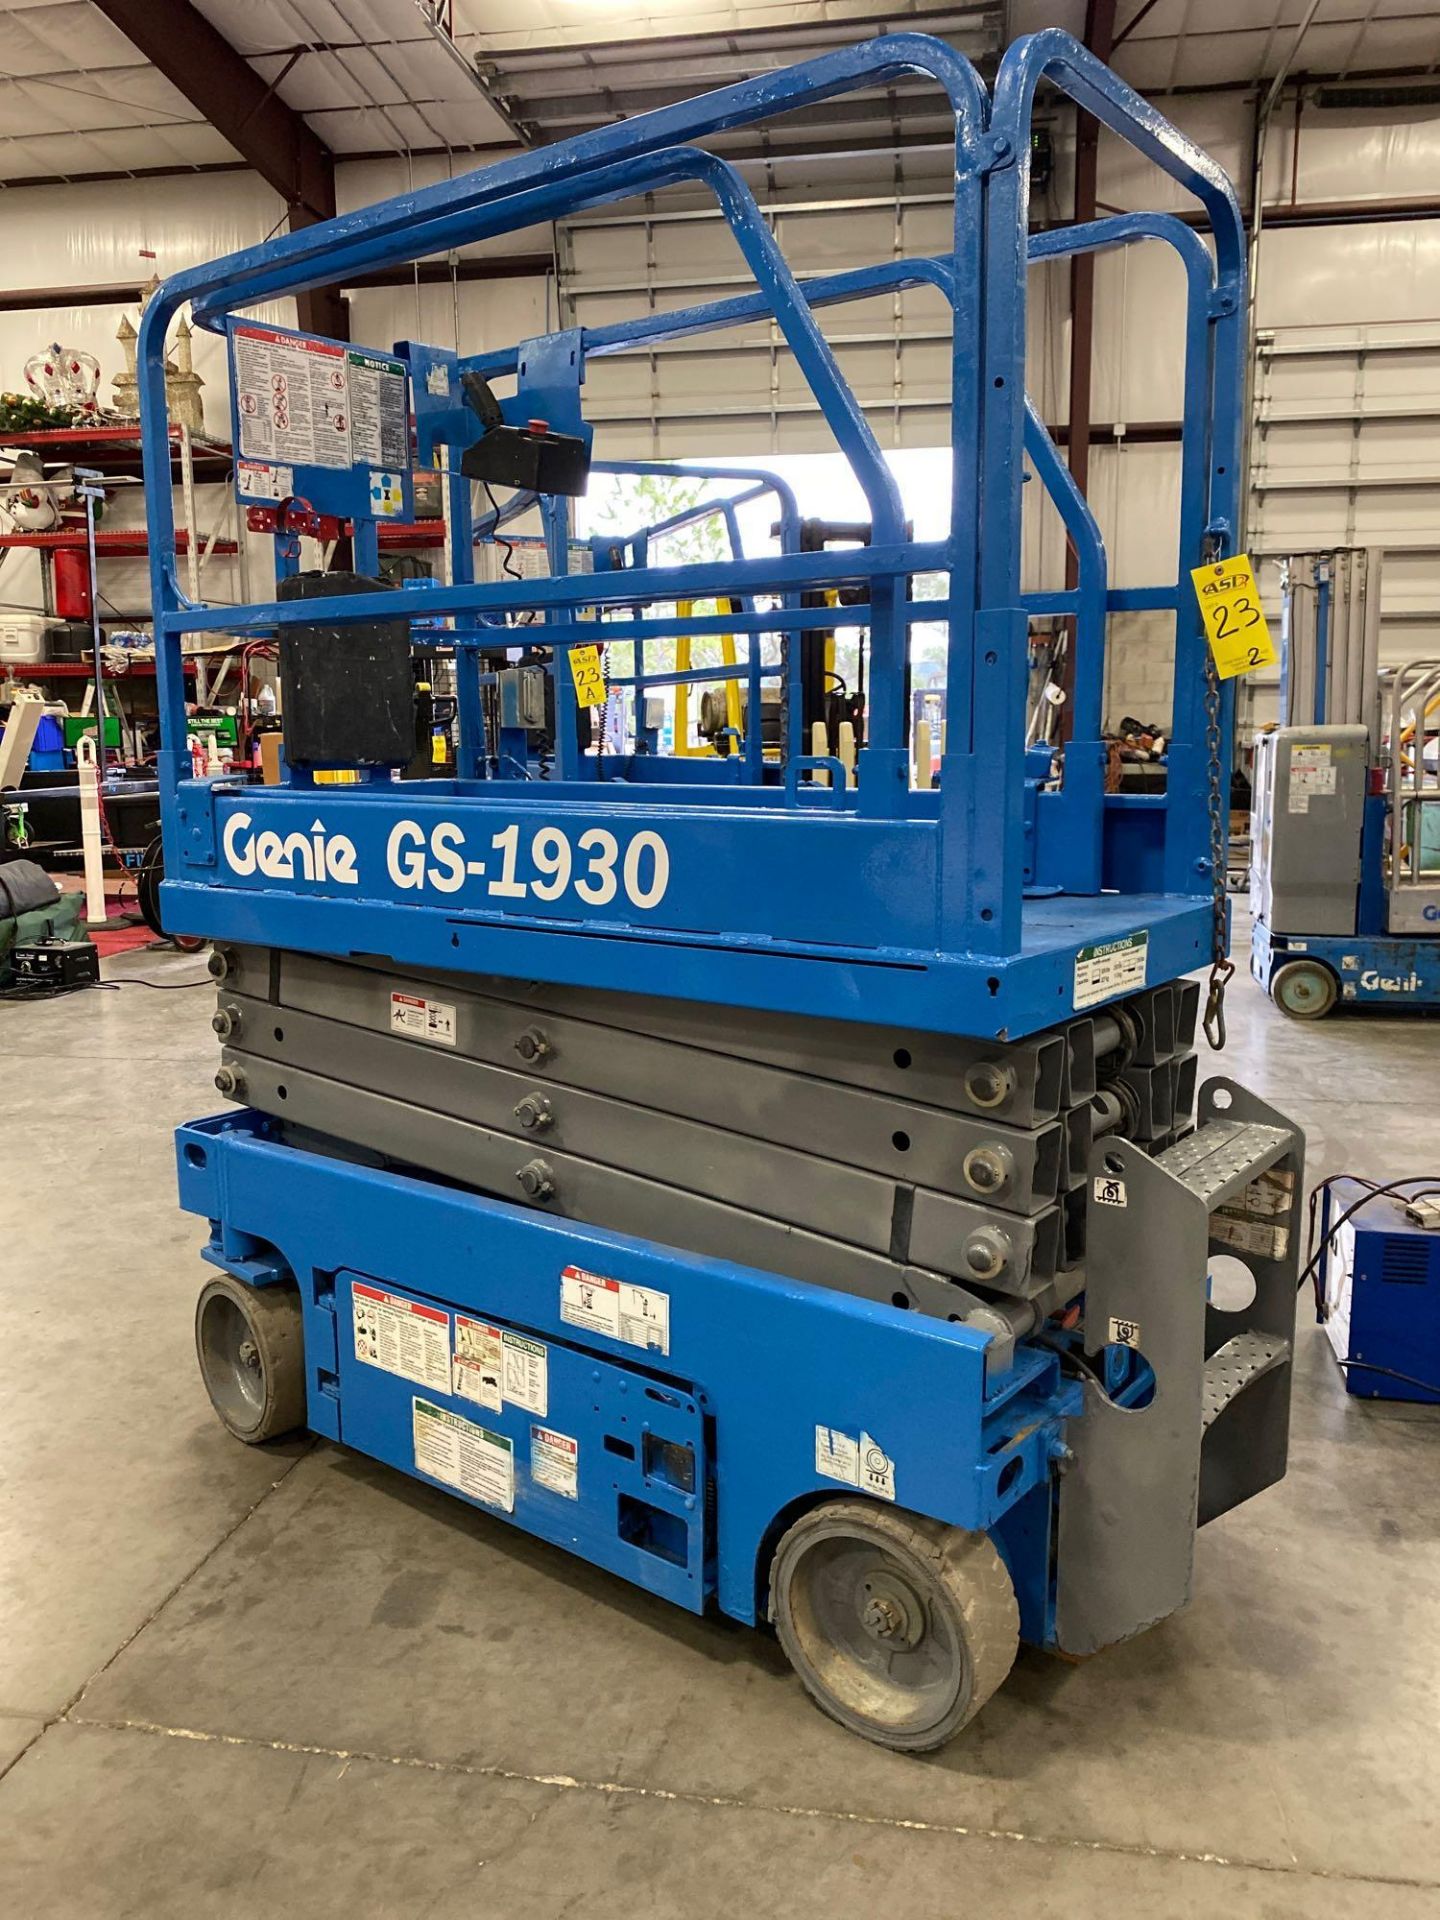 2013 GENIE GS1930 SCISSOR LIFT, SELF PROPELLED, 19' PLATFORM HEIGHT, BUILT IN BATTERY CHARGER, SLIDE - Image 3 of 6